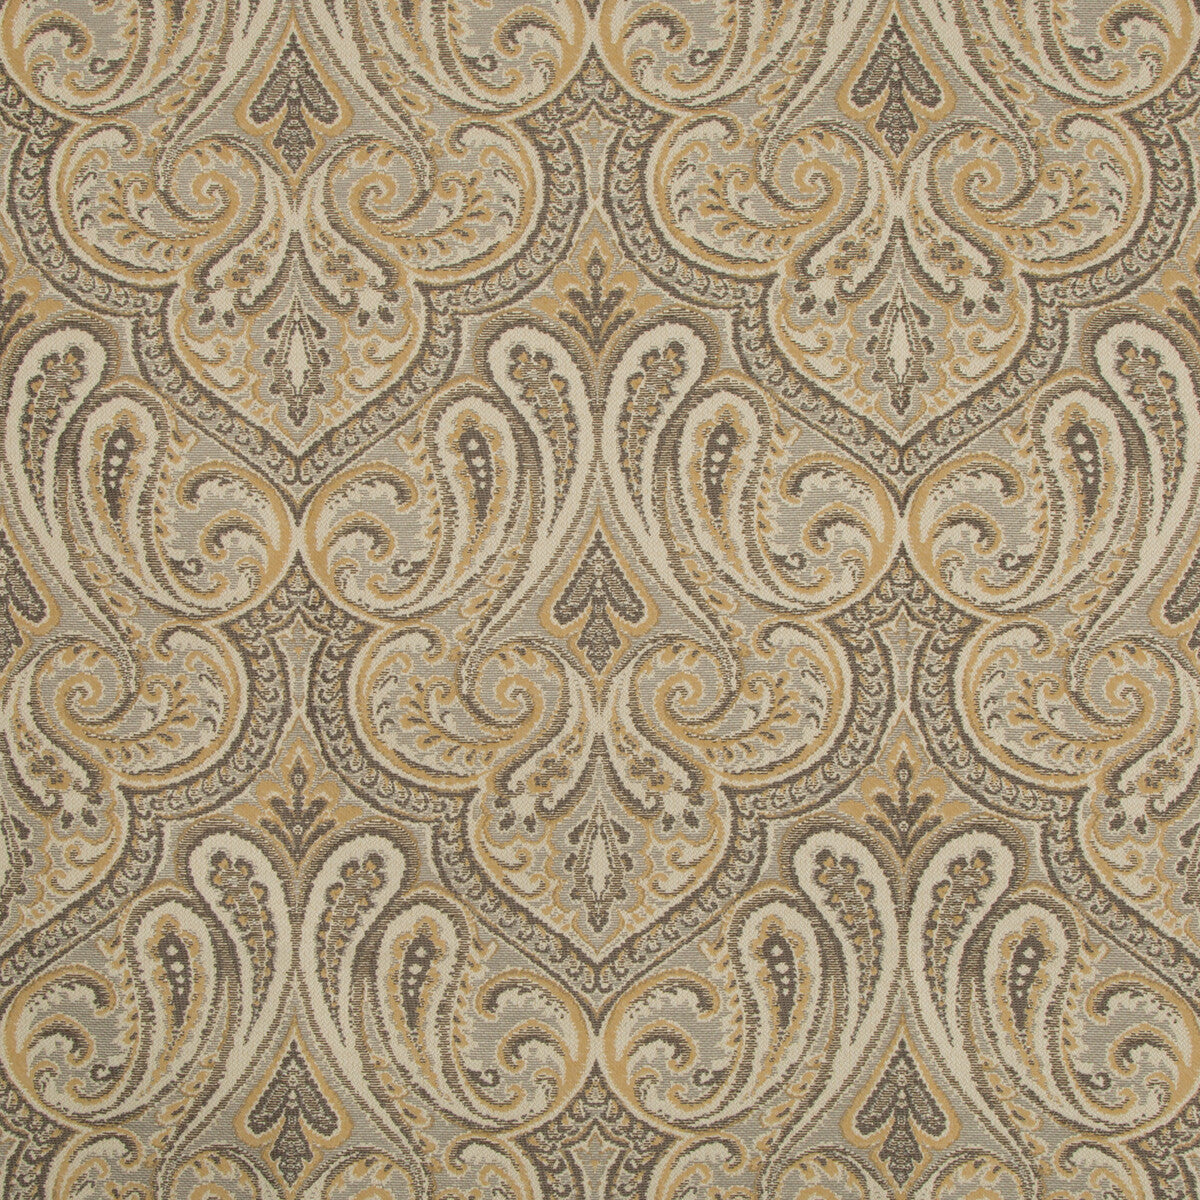 Kravet Design fabric in 34706-16 color - pattern 34706.16.0 - by Kravet Design in the Crypton Home collection